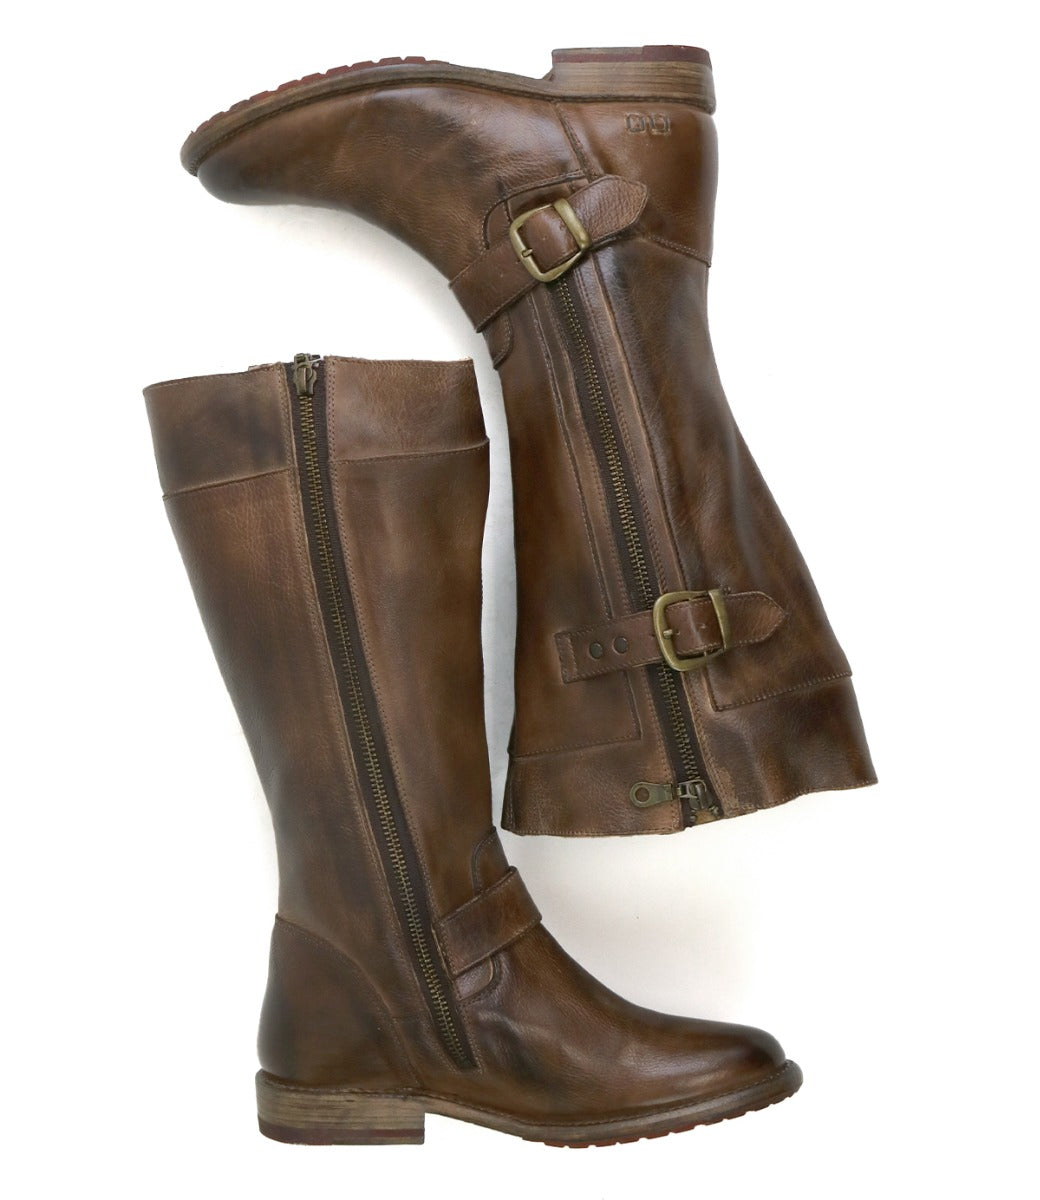 A pair of Gogo Lug Wide Calf brown leather boots with buckles and zippers by Bed Stu.